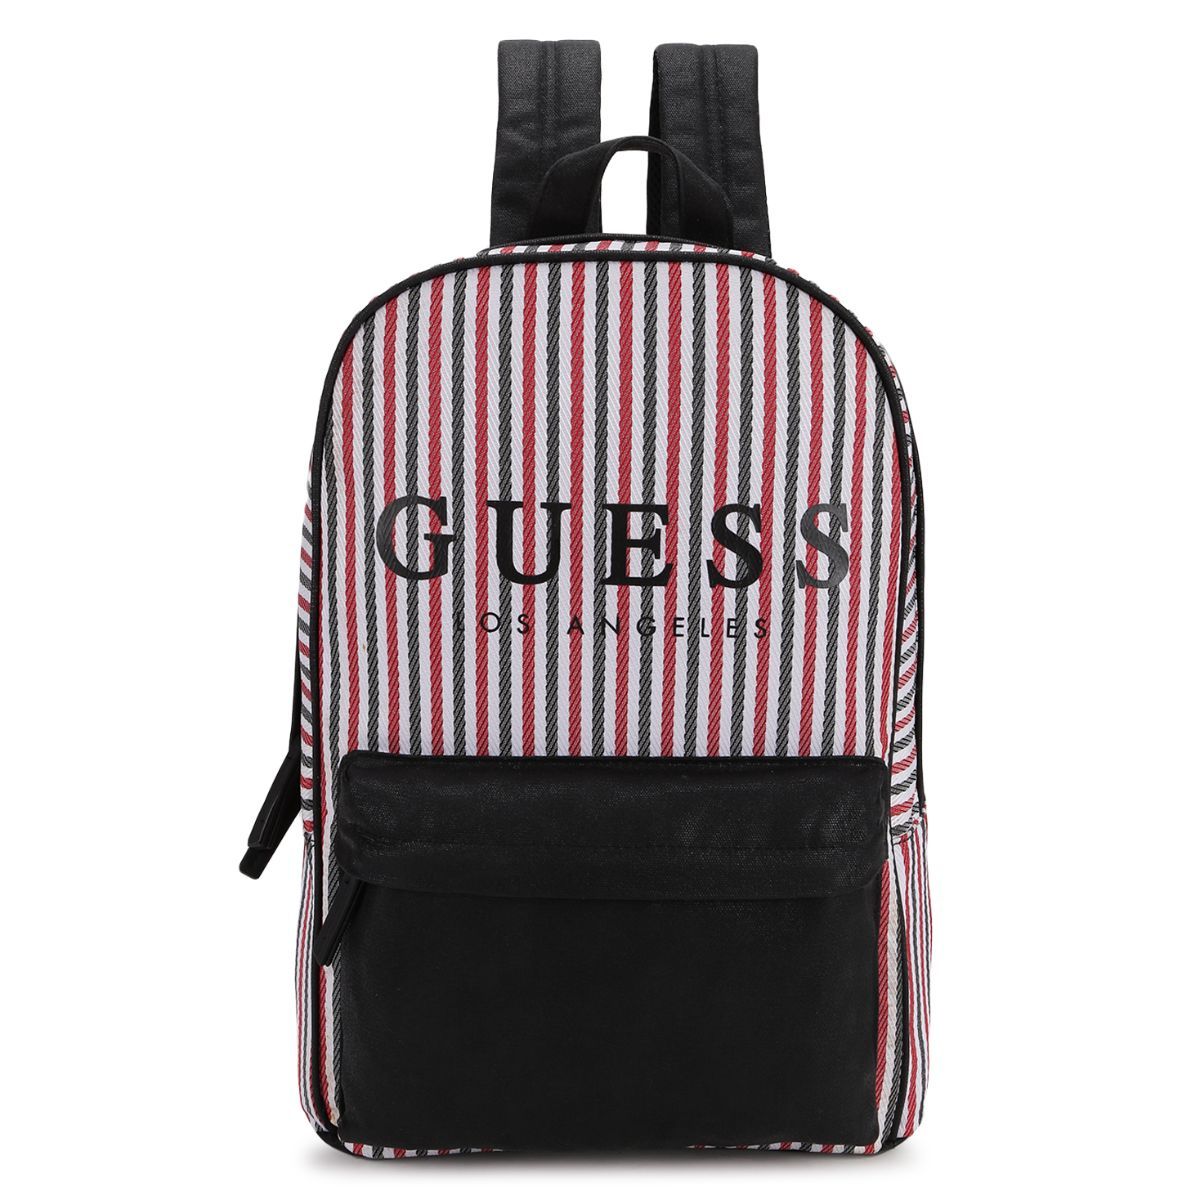 Guess SALERNO MID - Bag GUESS - IetpShops | Notebook bags and backpacks -  Leather goods - Accessories - Vezzola Smart Work Bag HMEVZZ P2114 BLA